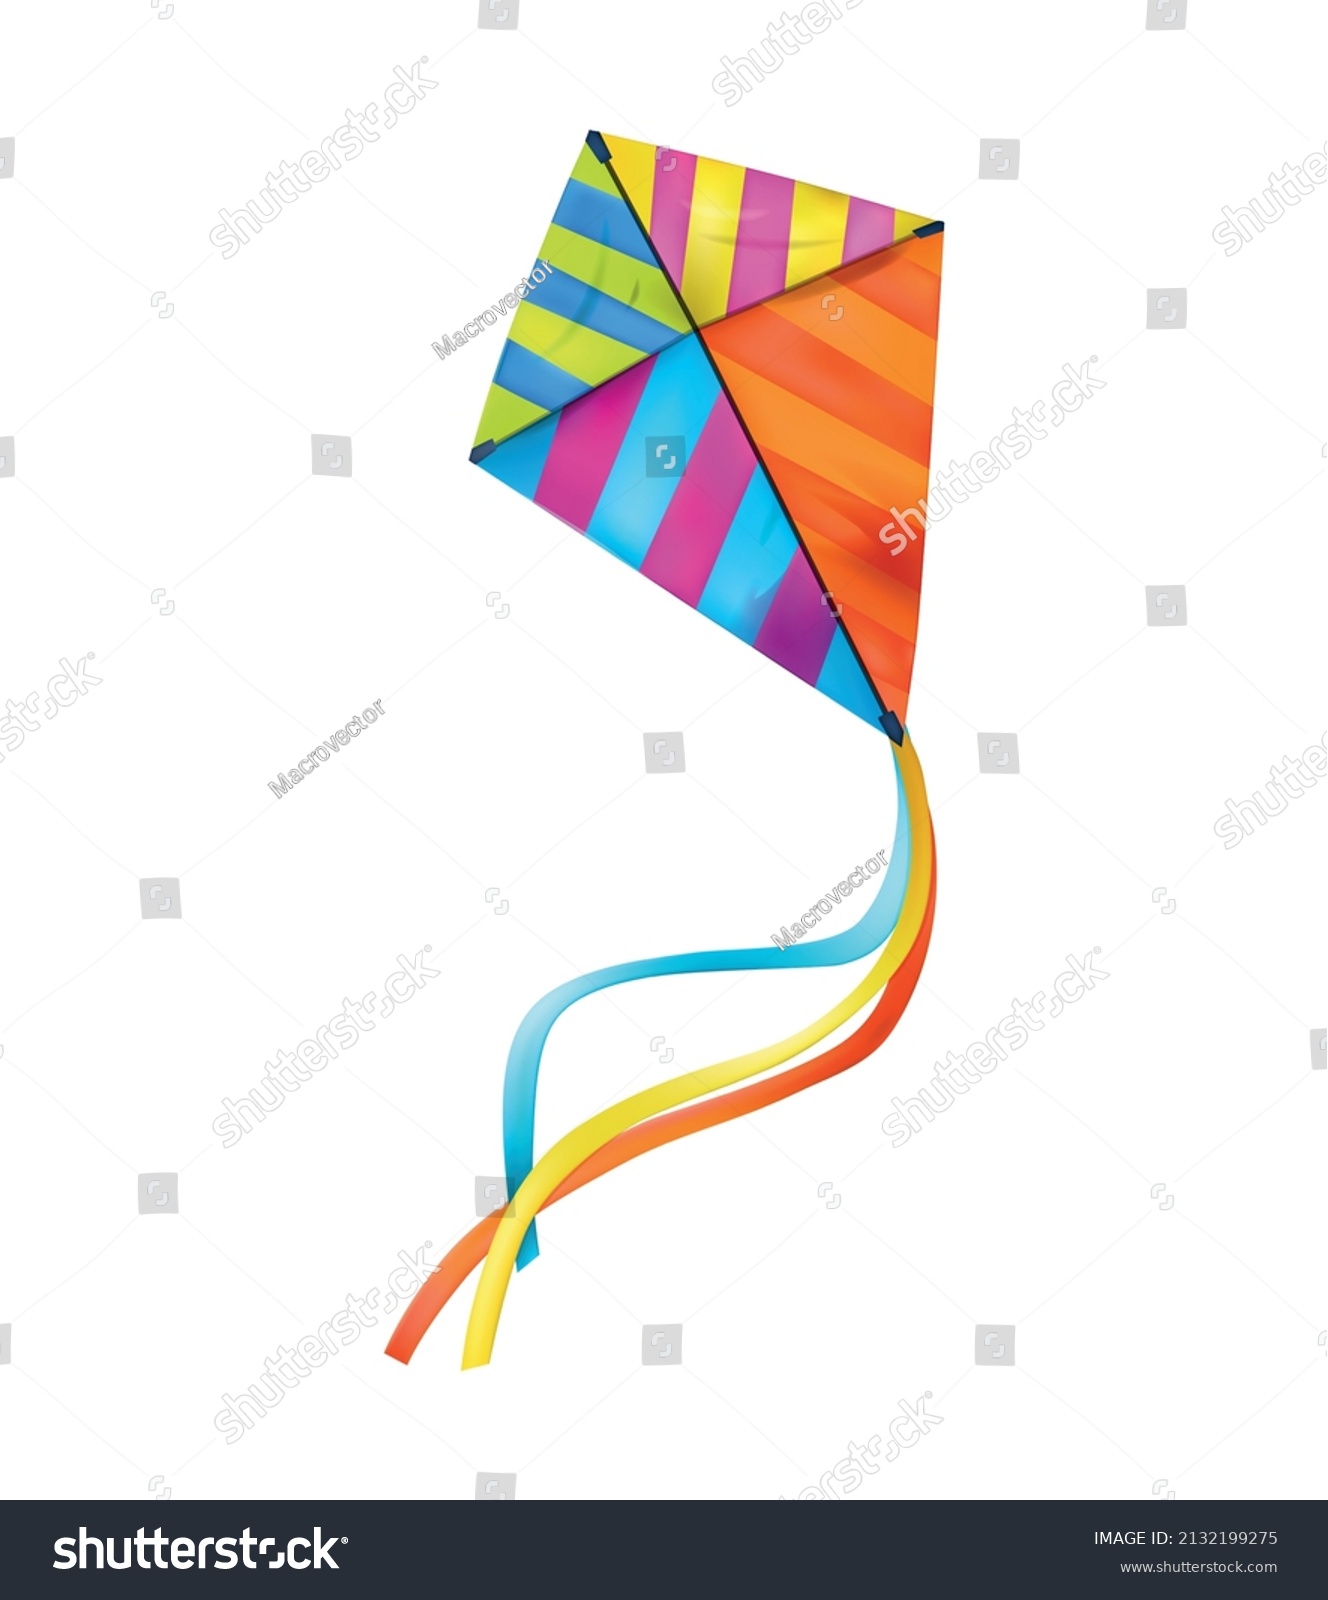 SVG of Realistic kite composition with realistic image of colorful kite on blank background vector illustration svg